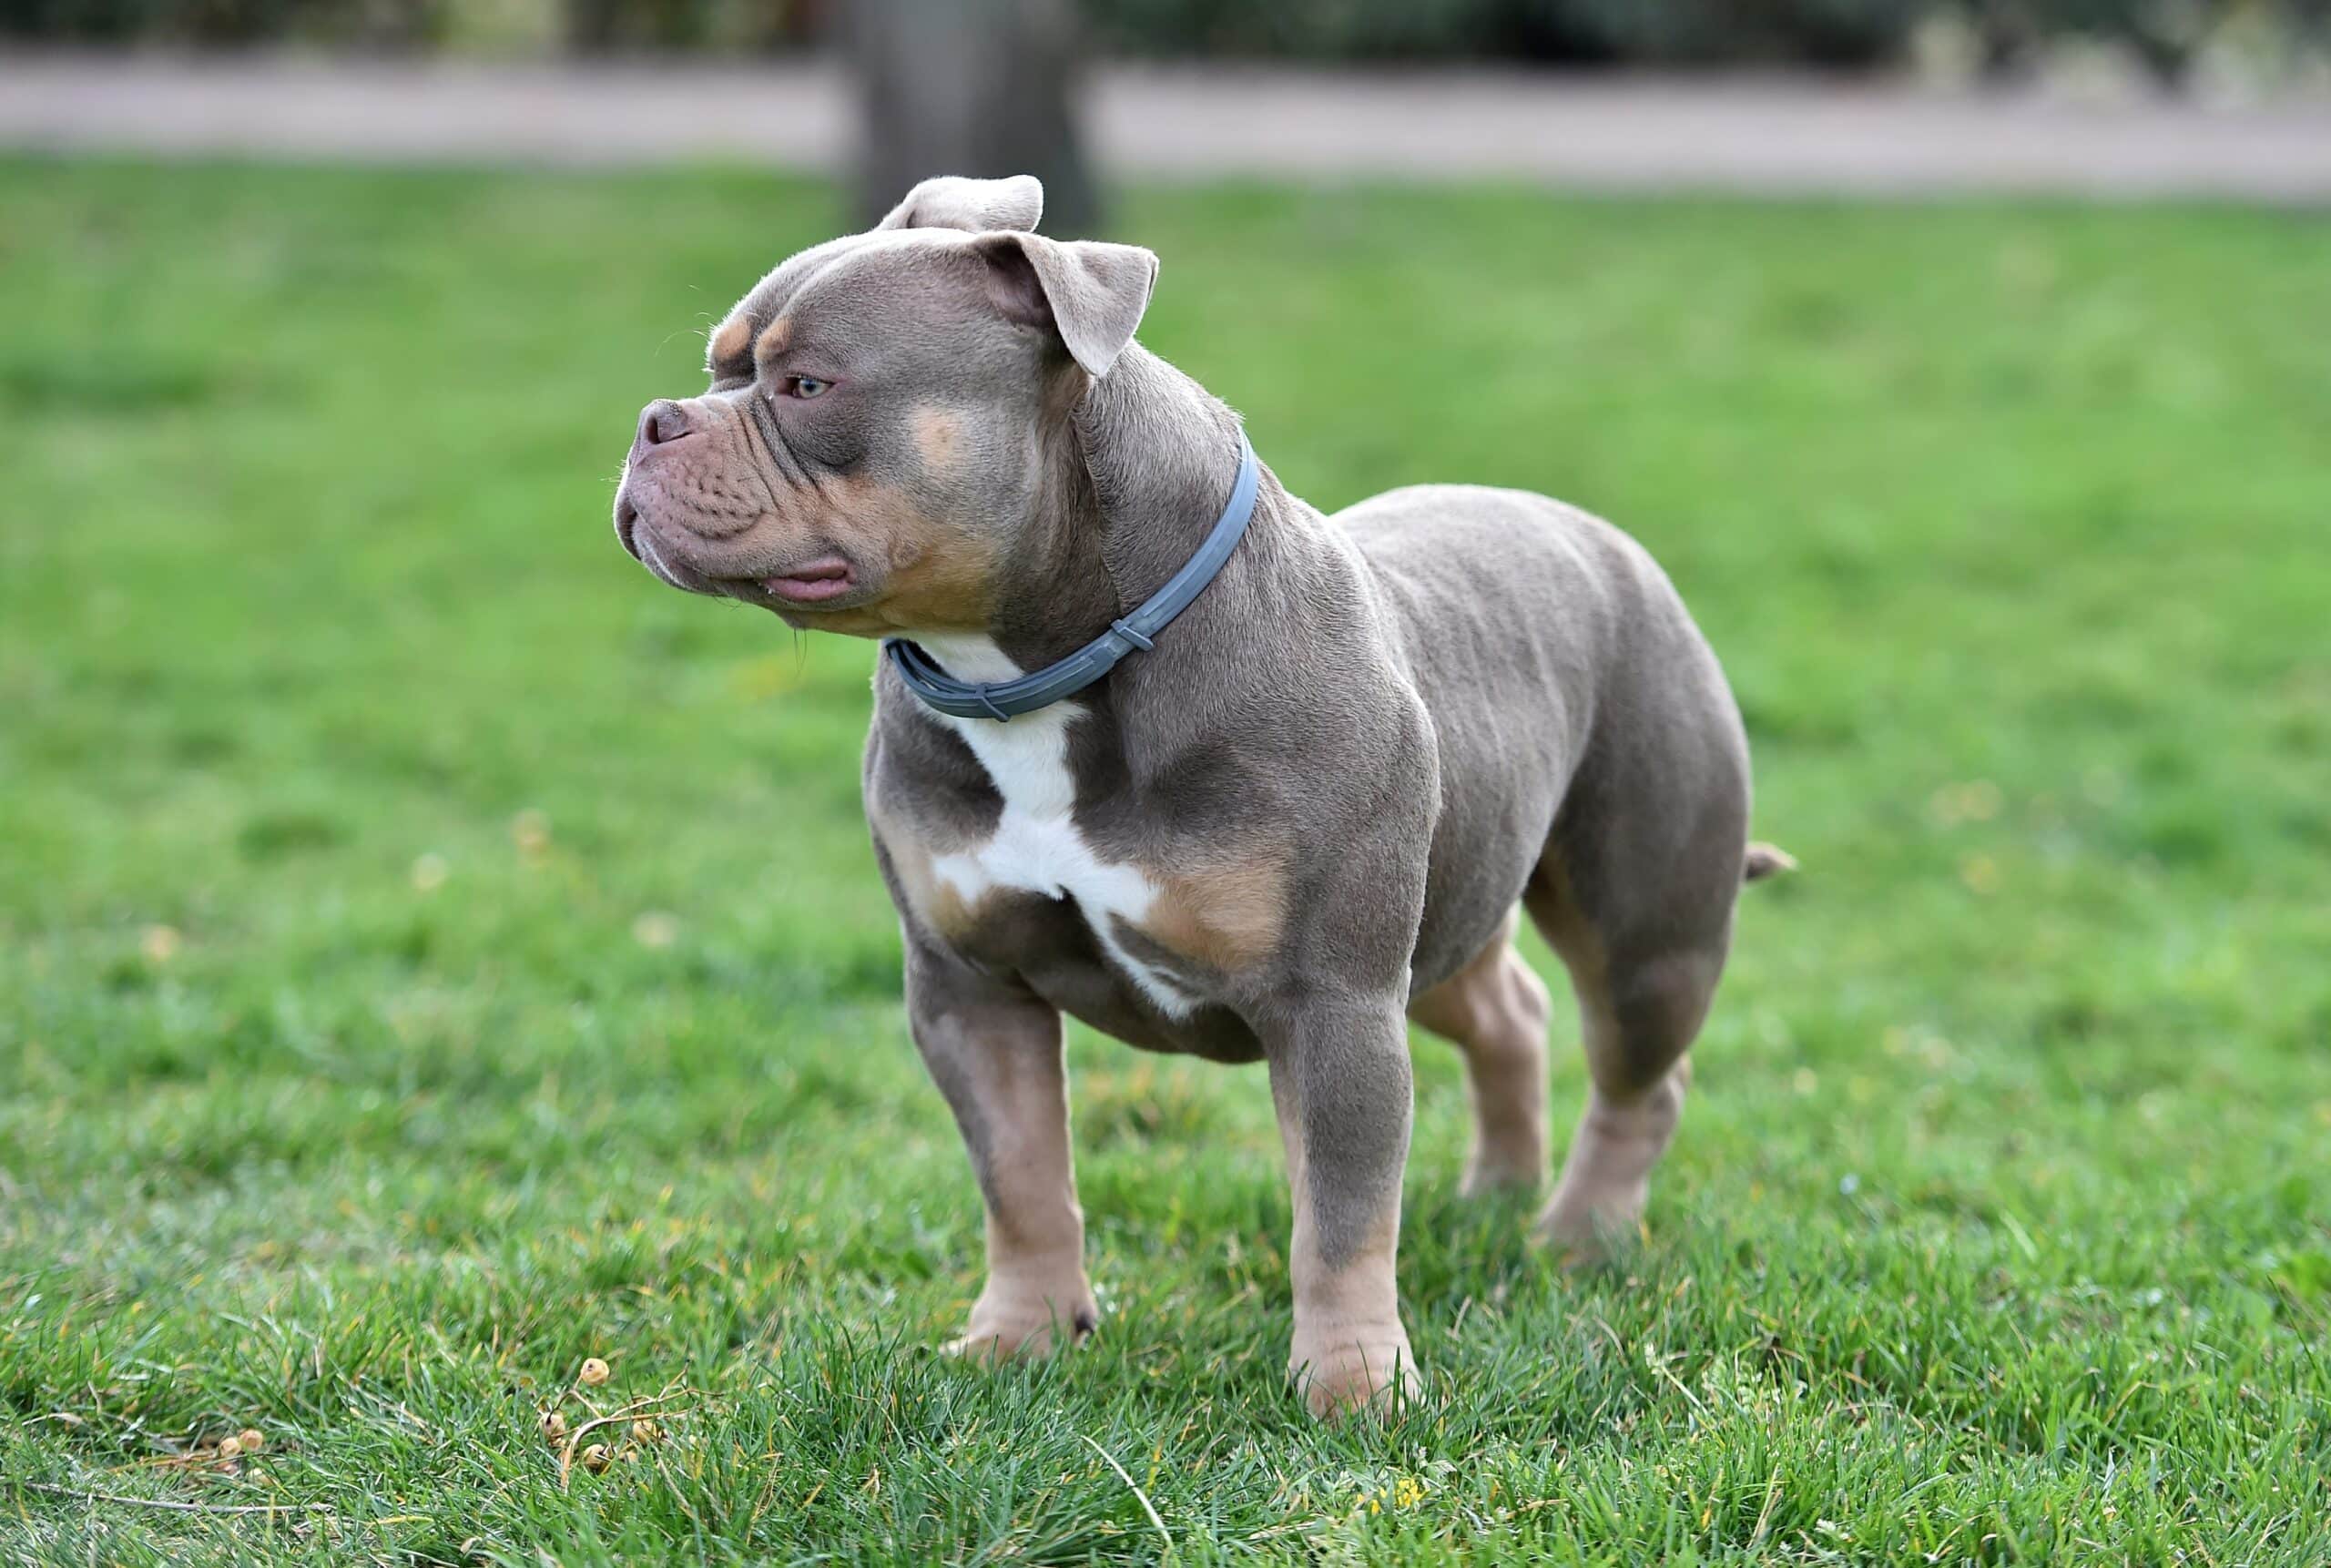 Chamuco Pit Bull Dog in the field